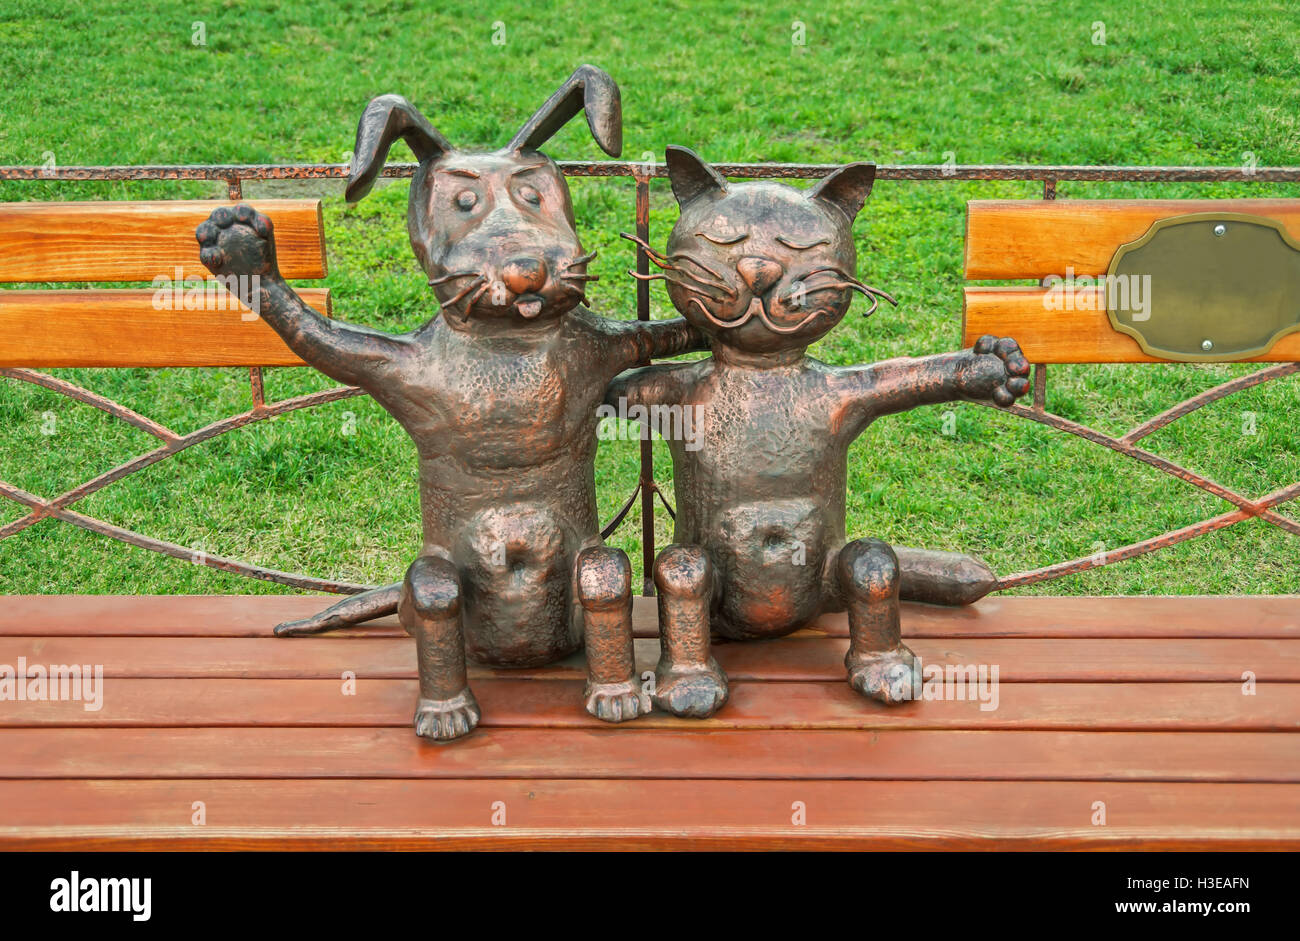 Cats and dogs - figurines, art and photos